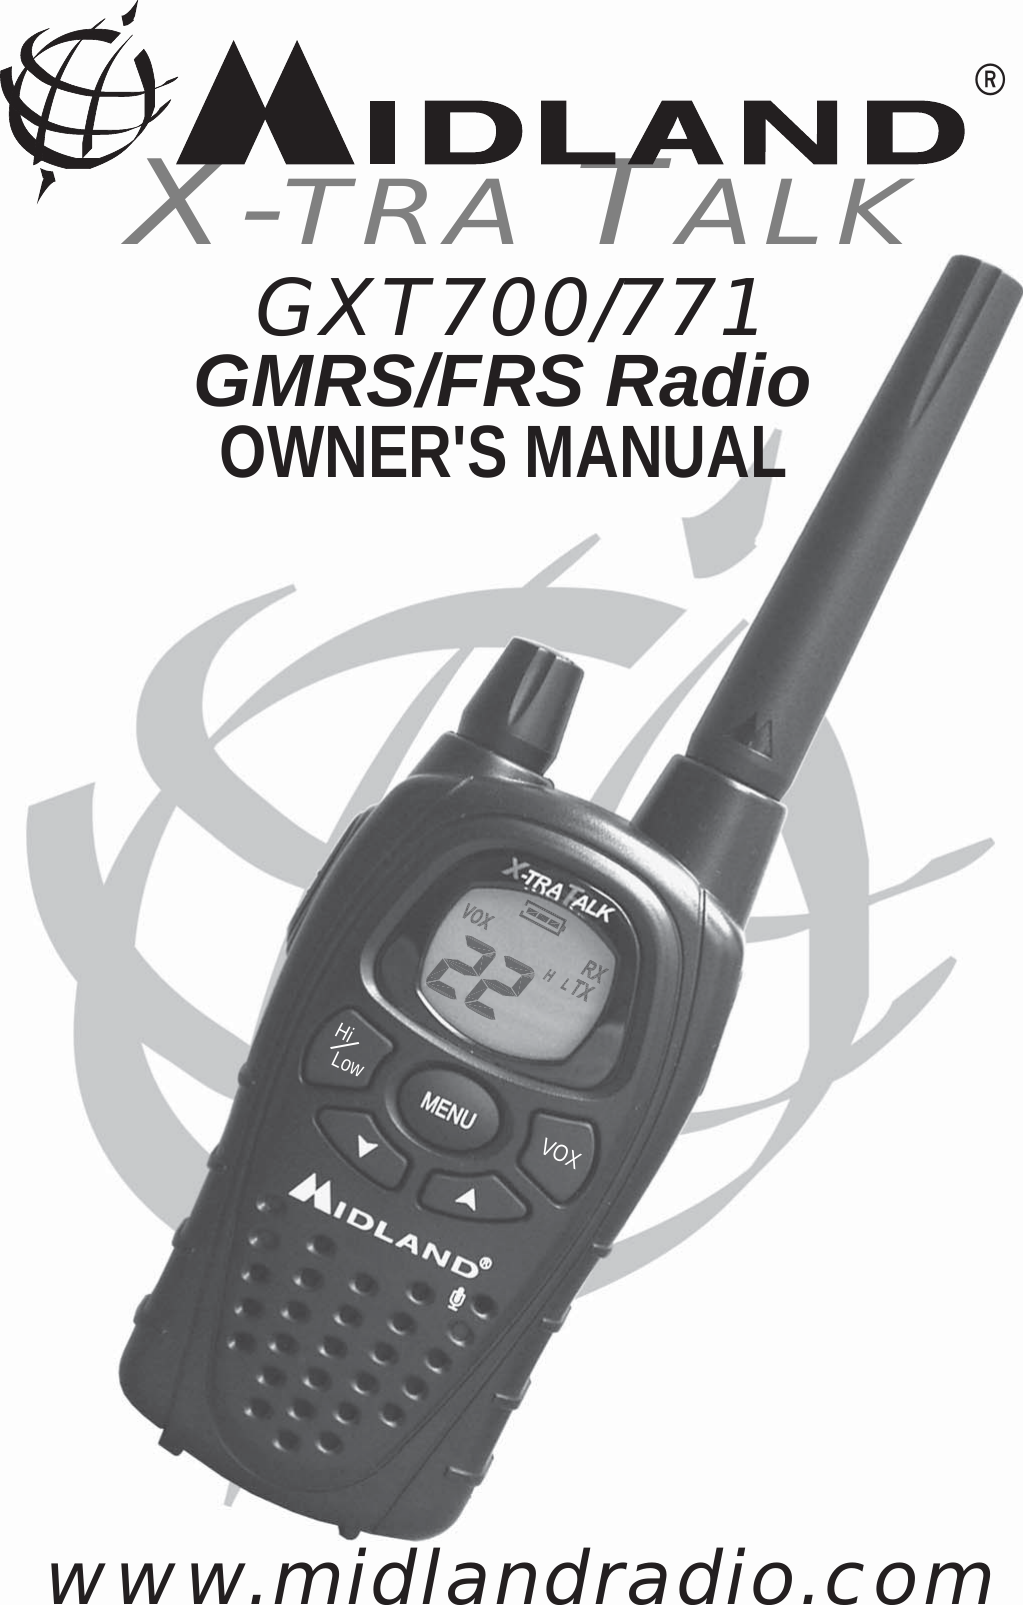      GXT700/771    GMRS/FRS RadioX-TRA TALK®OWNER&apos;S MANUALwww.midlandradio.comHi/Low VOX